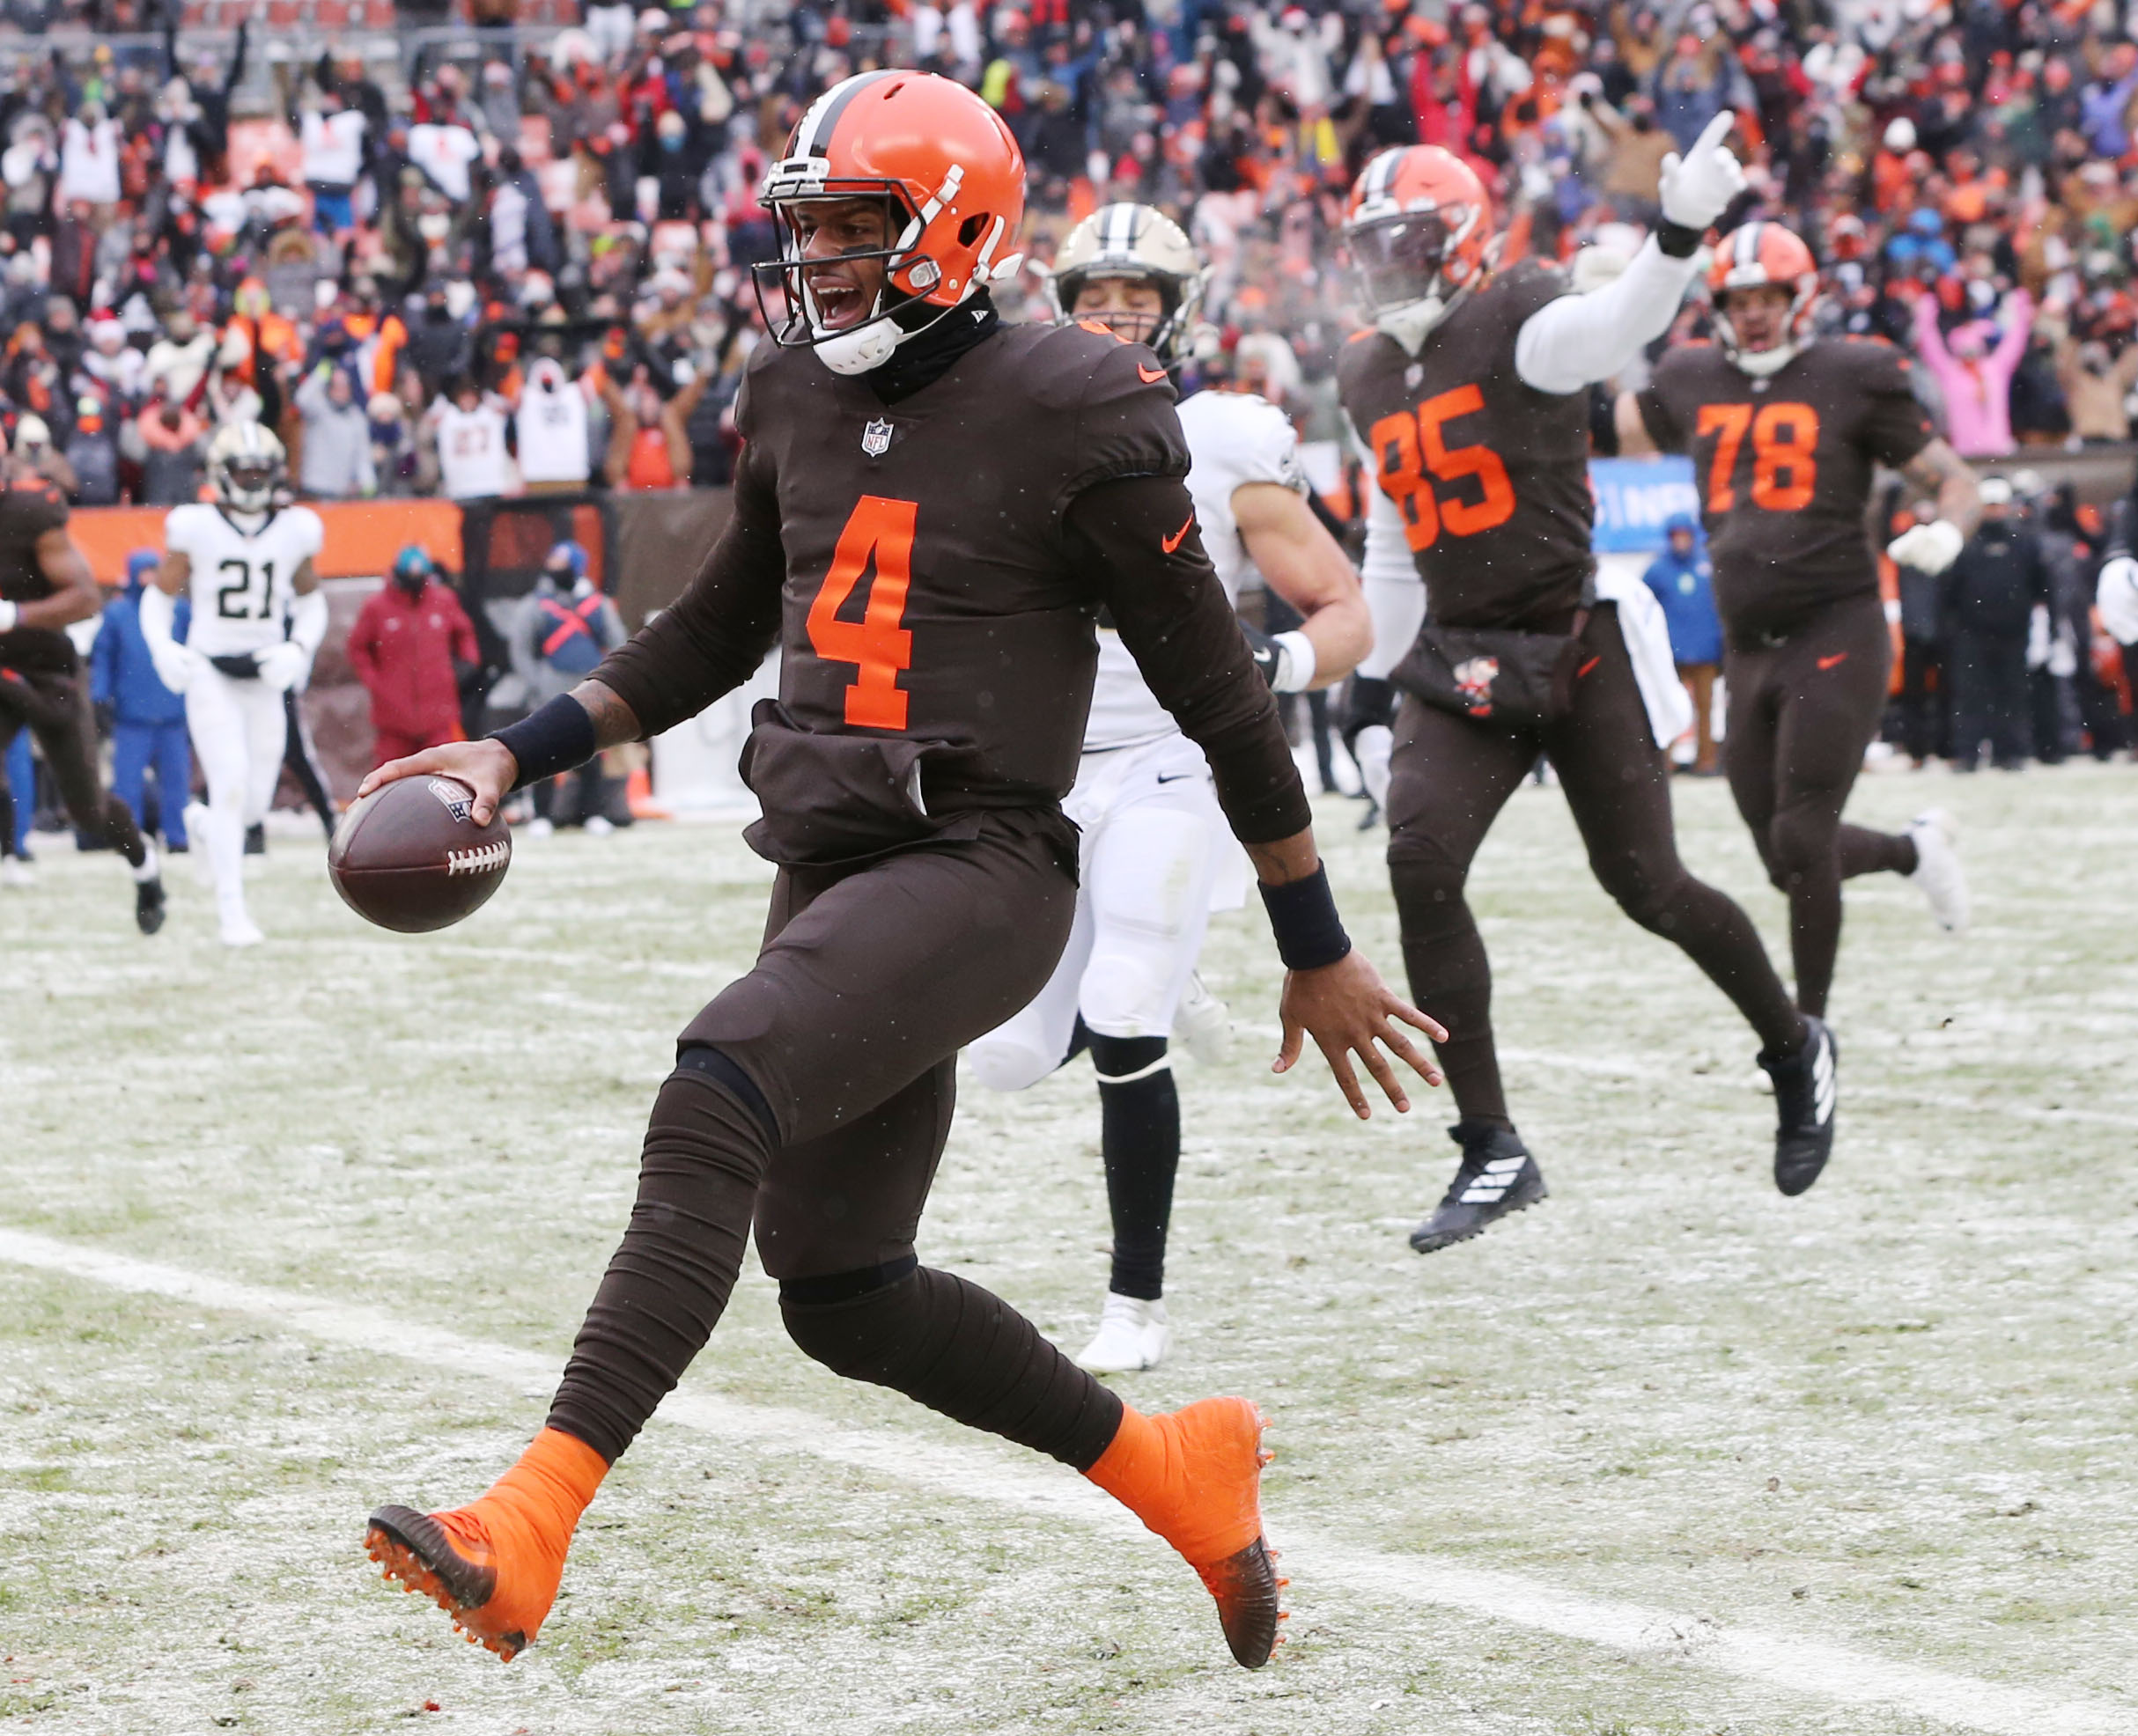 Browns vs. Commanders: How to watch, stream game on TV